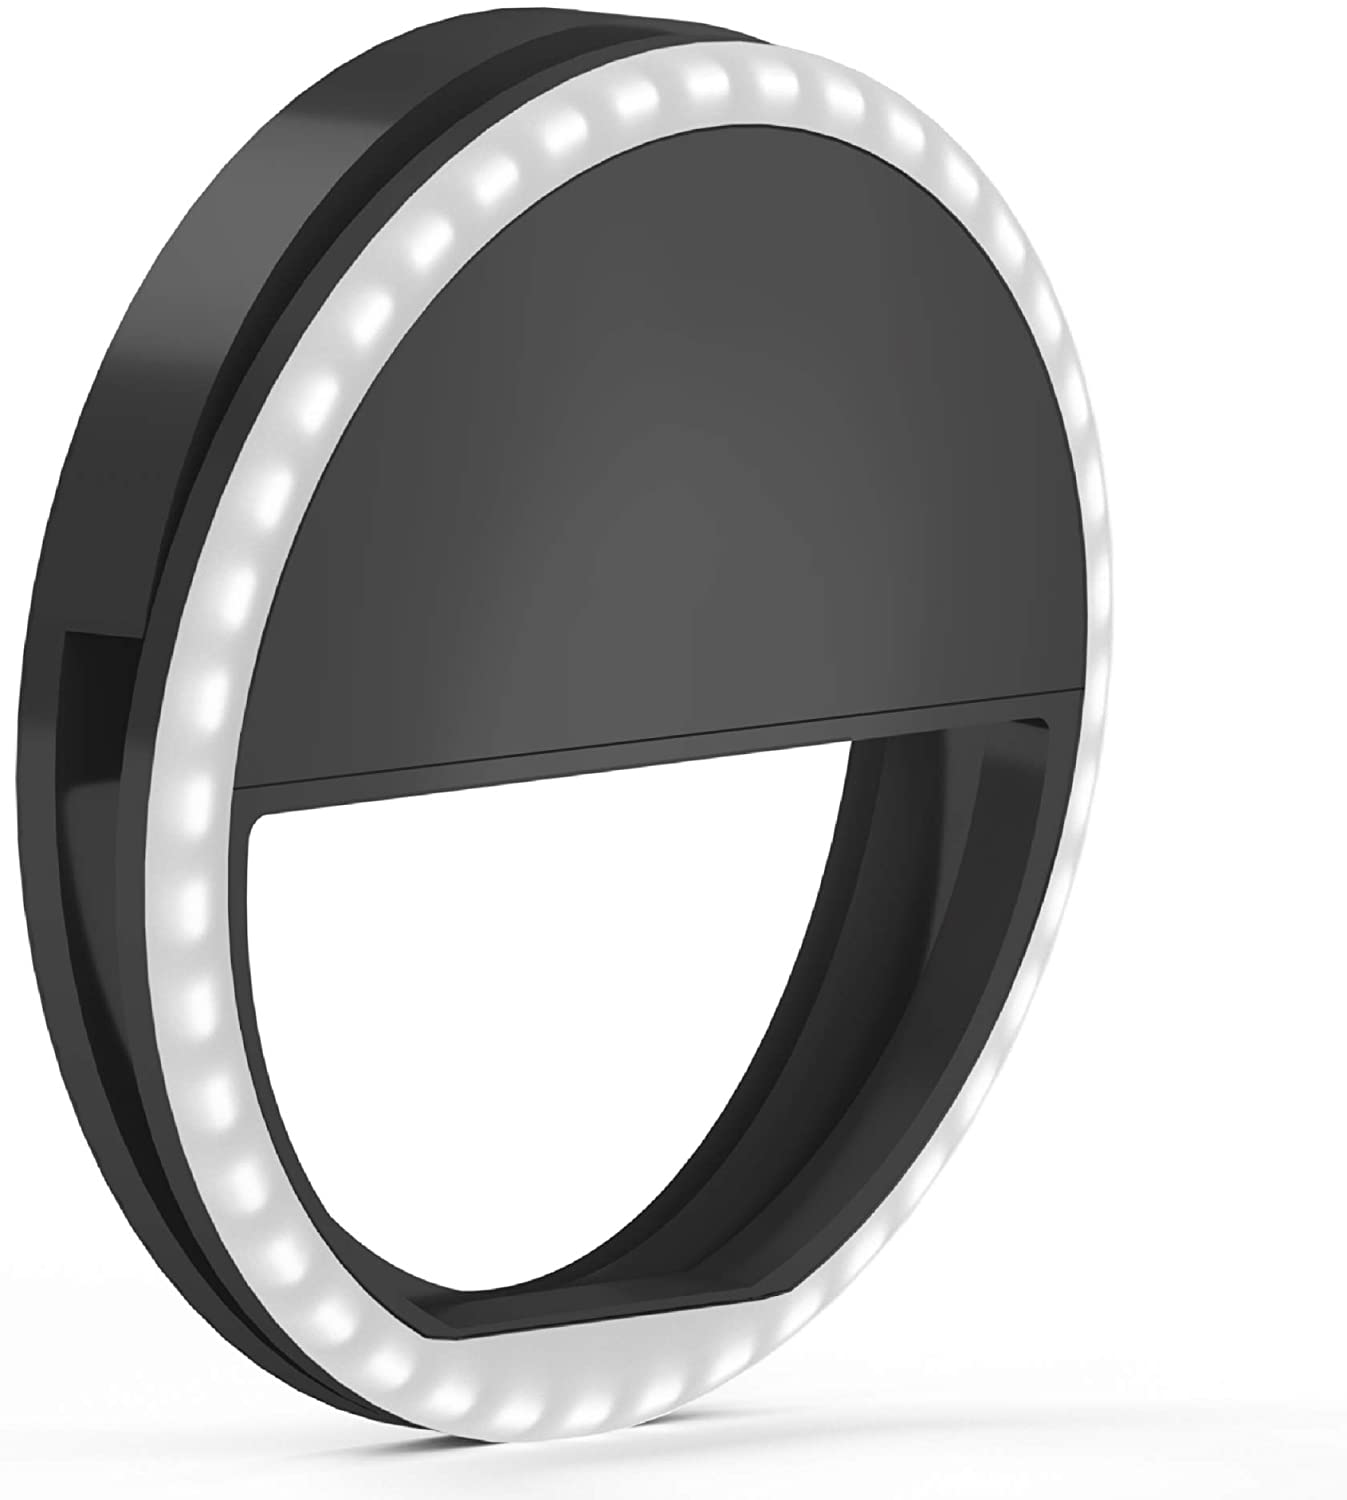 A small ring light.